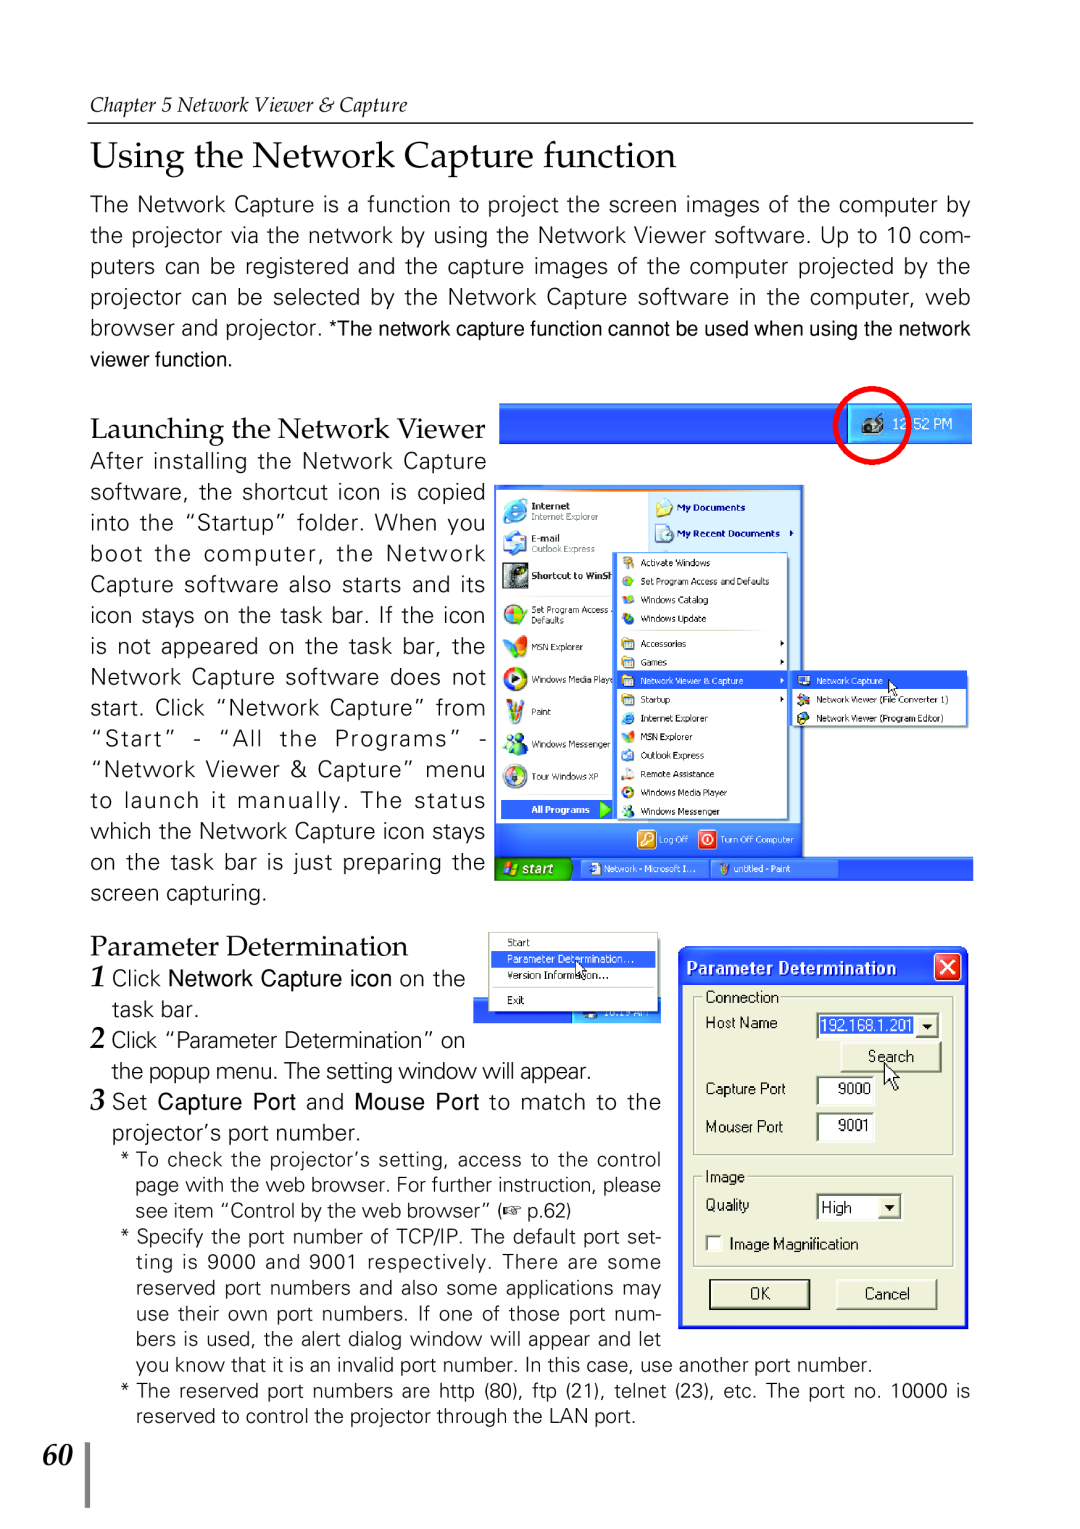 Eiki PjNET-20 owner manual Using the Network Capture function, Launching the Network Viewer, Parameter Determination 